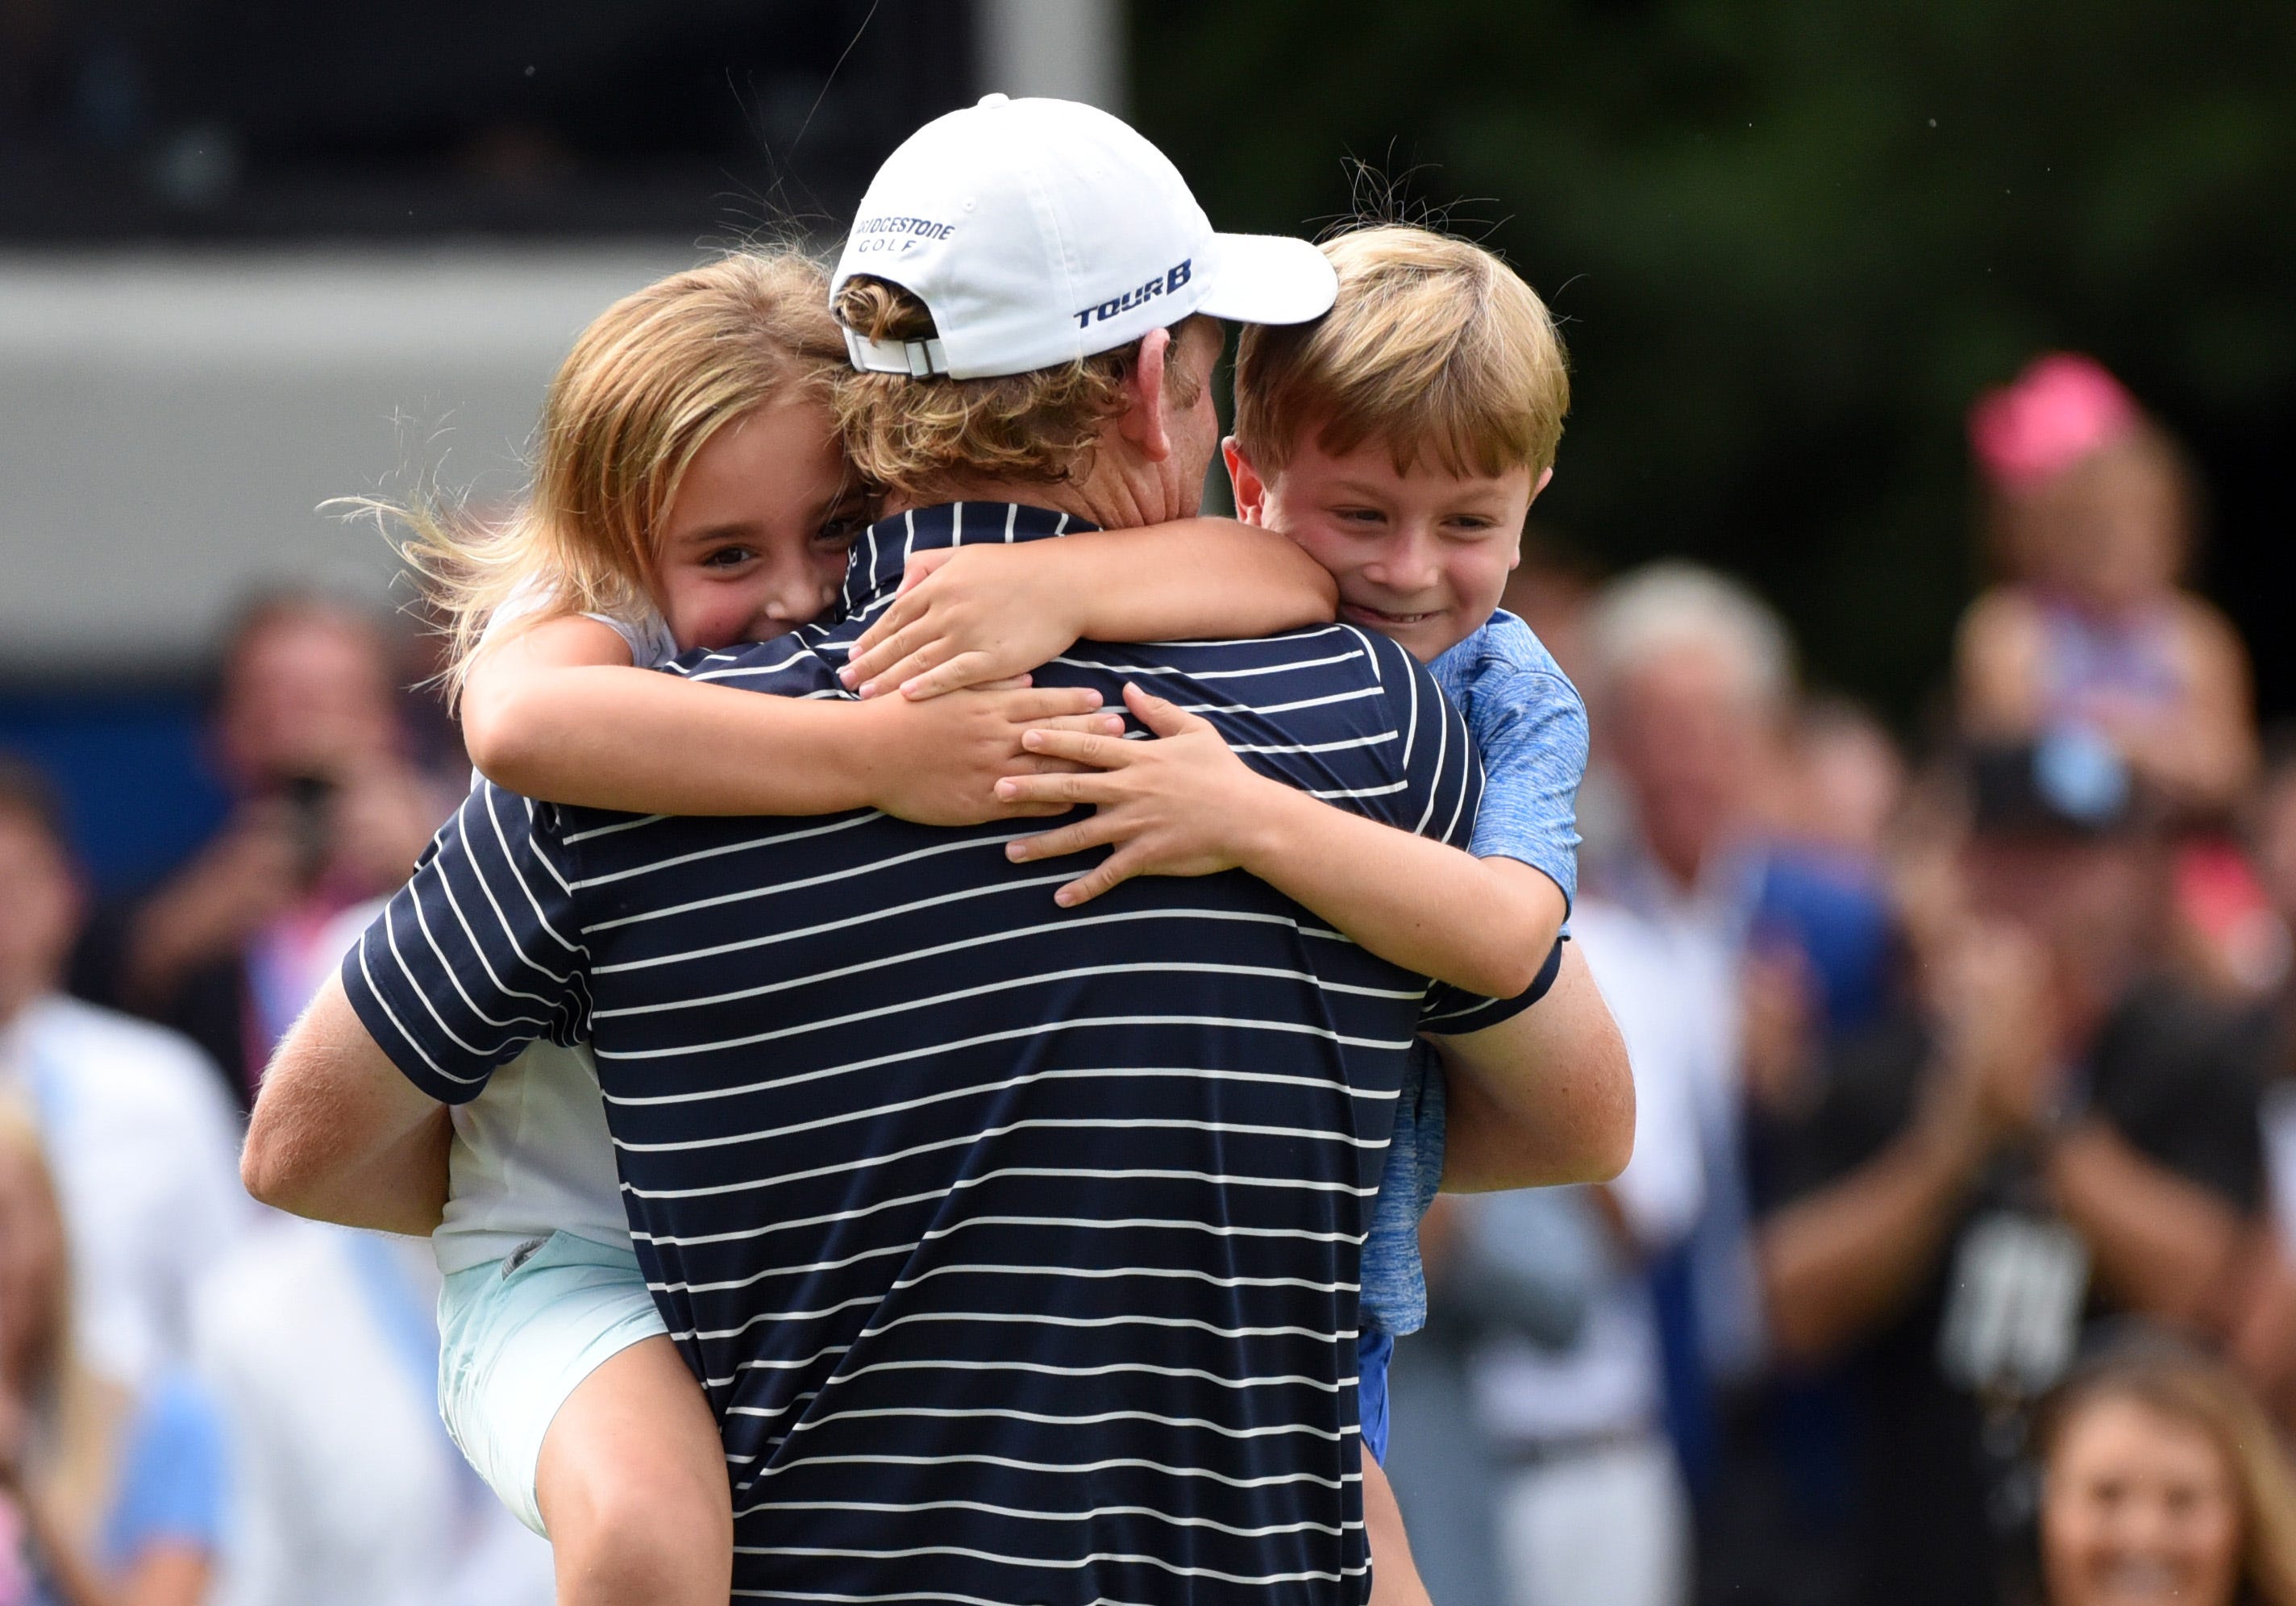 Brandt Snedeker is hugged by his children Lily, left, and Austin, right, after winning the Wyndham Championship golf tournament in Greensboro, N.C., Aug. 19, 2018.